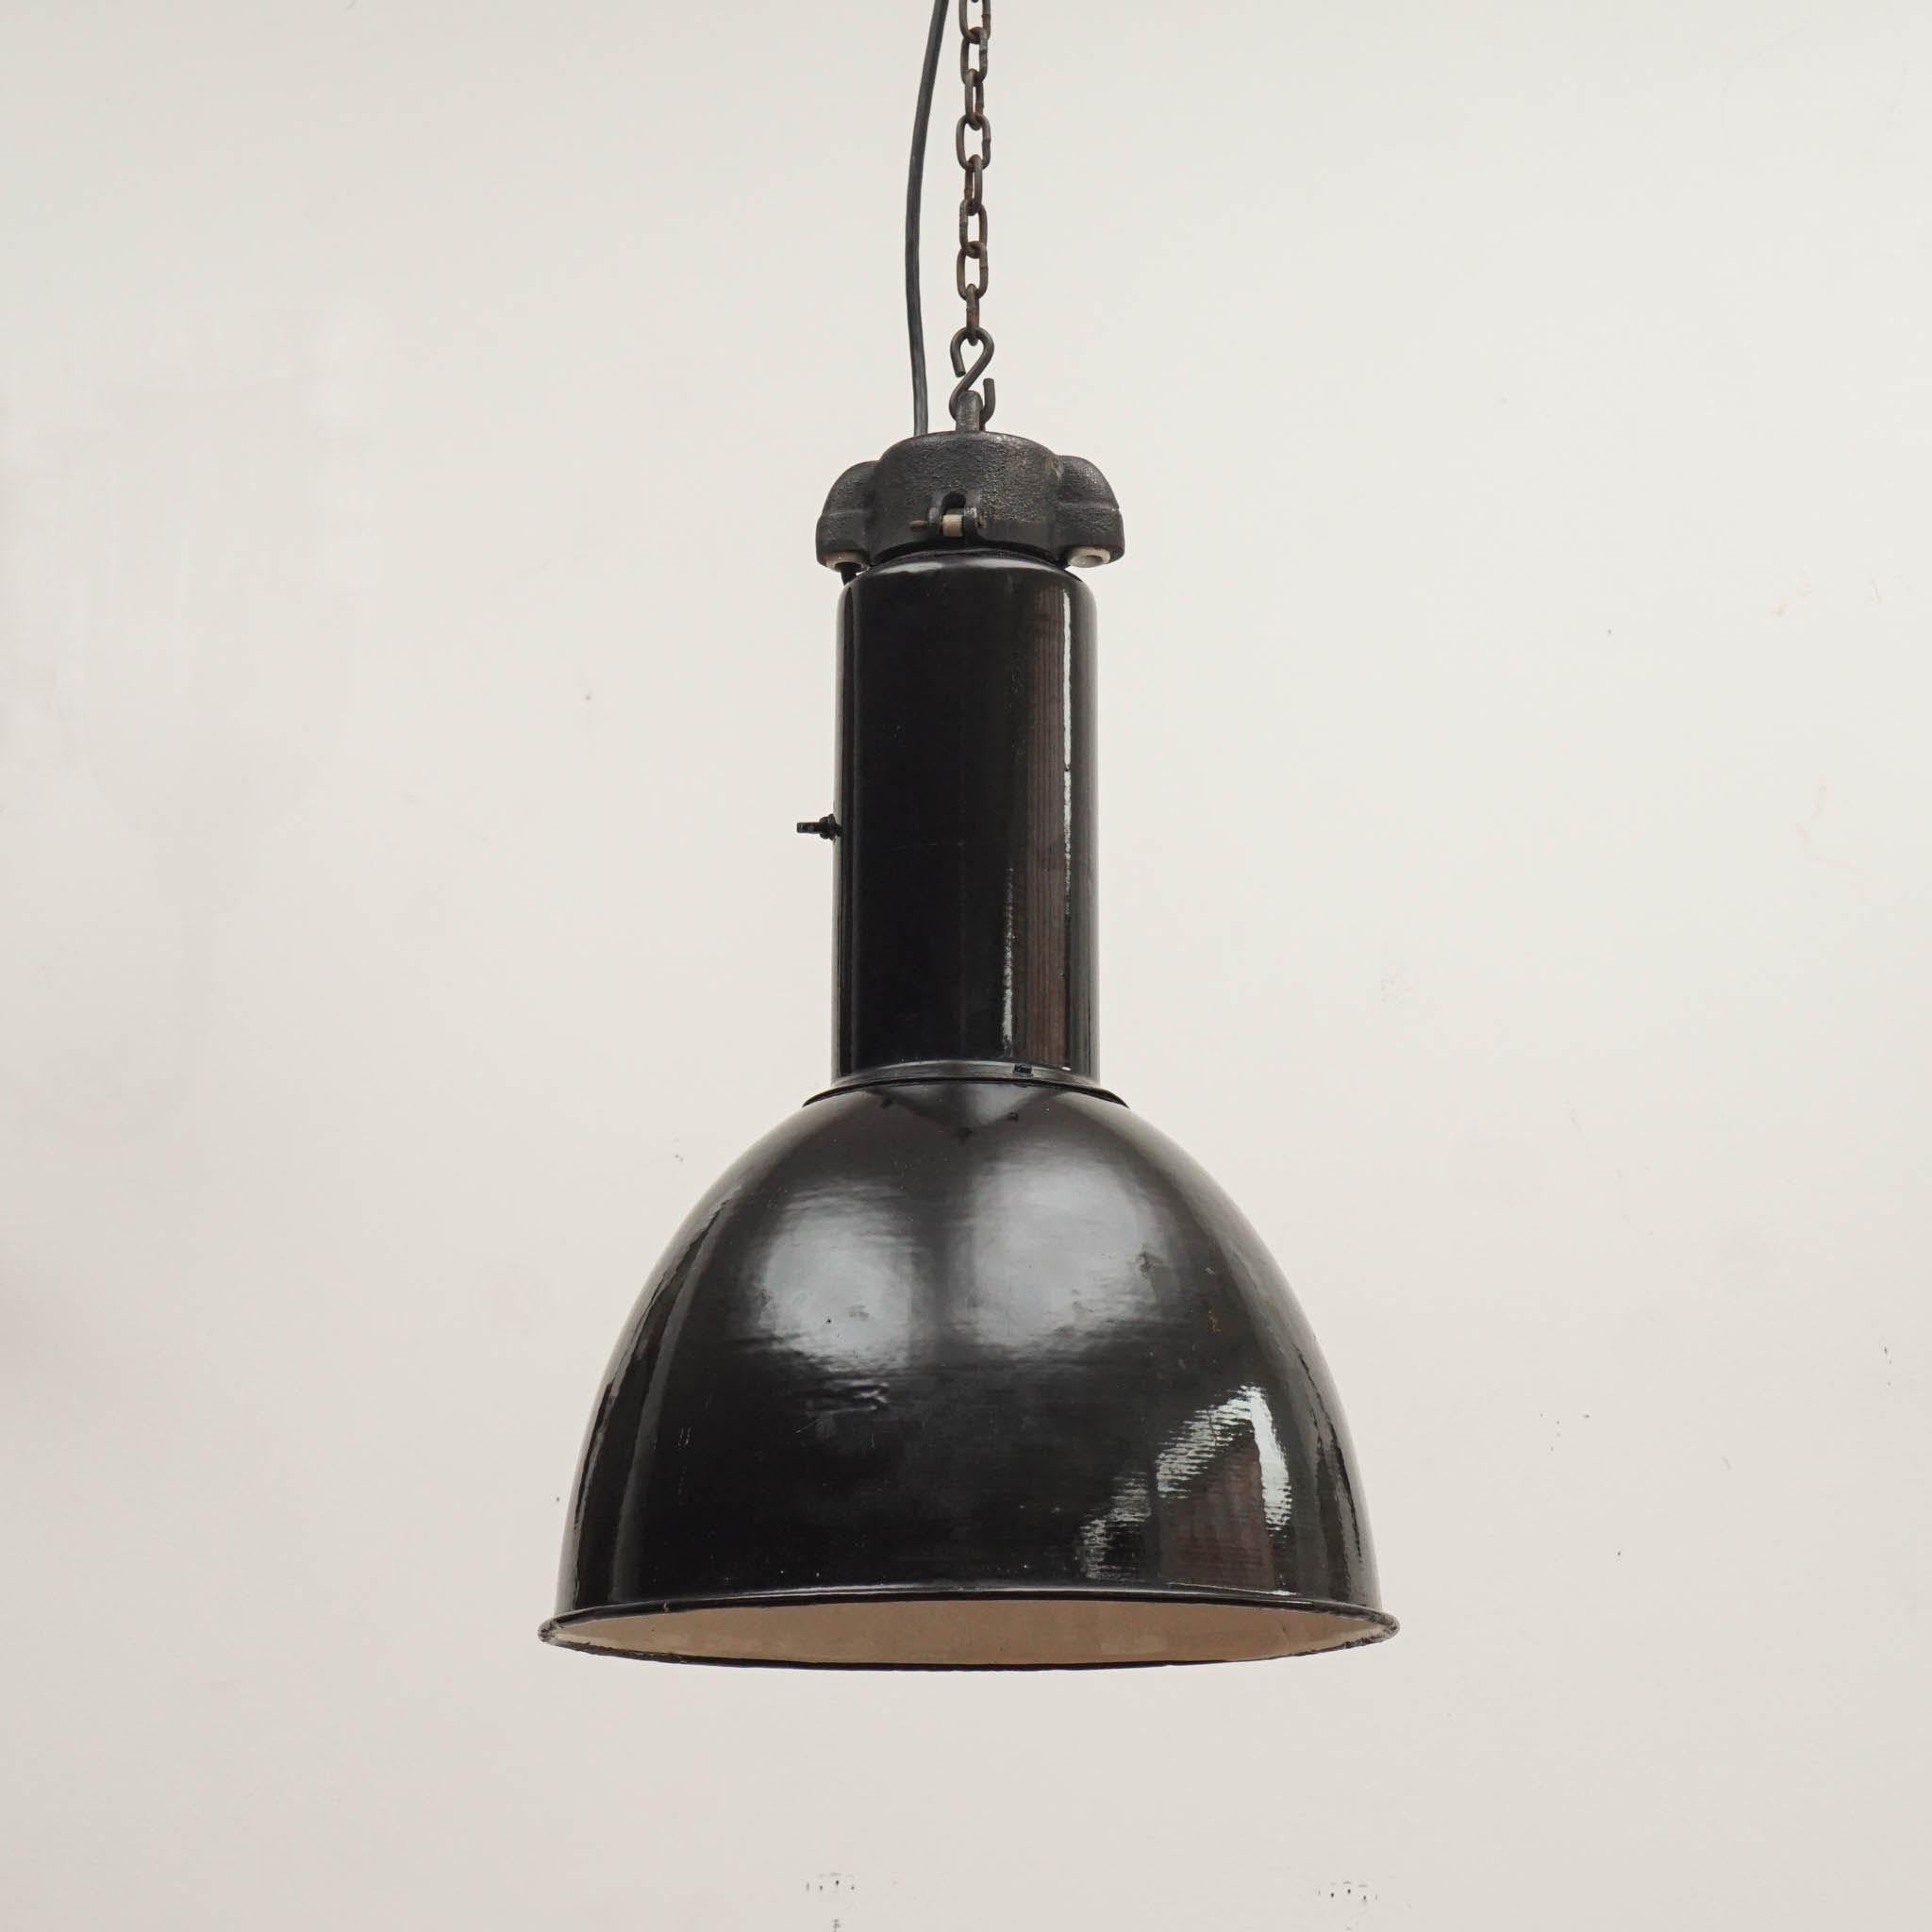 Hand-Crafted Vintage Industrial Factory Lights For Sale